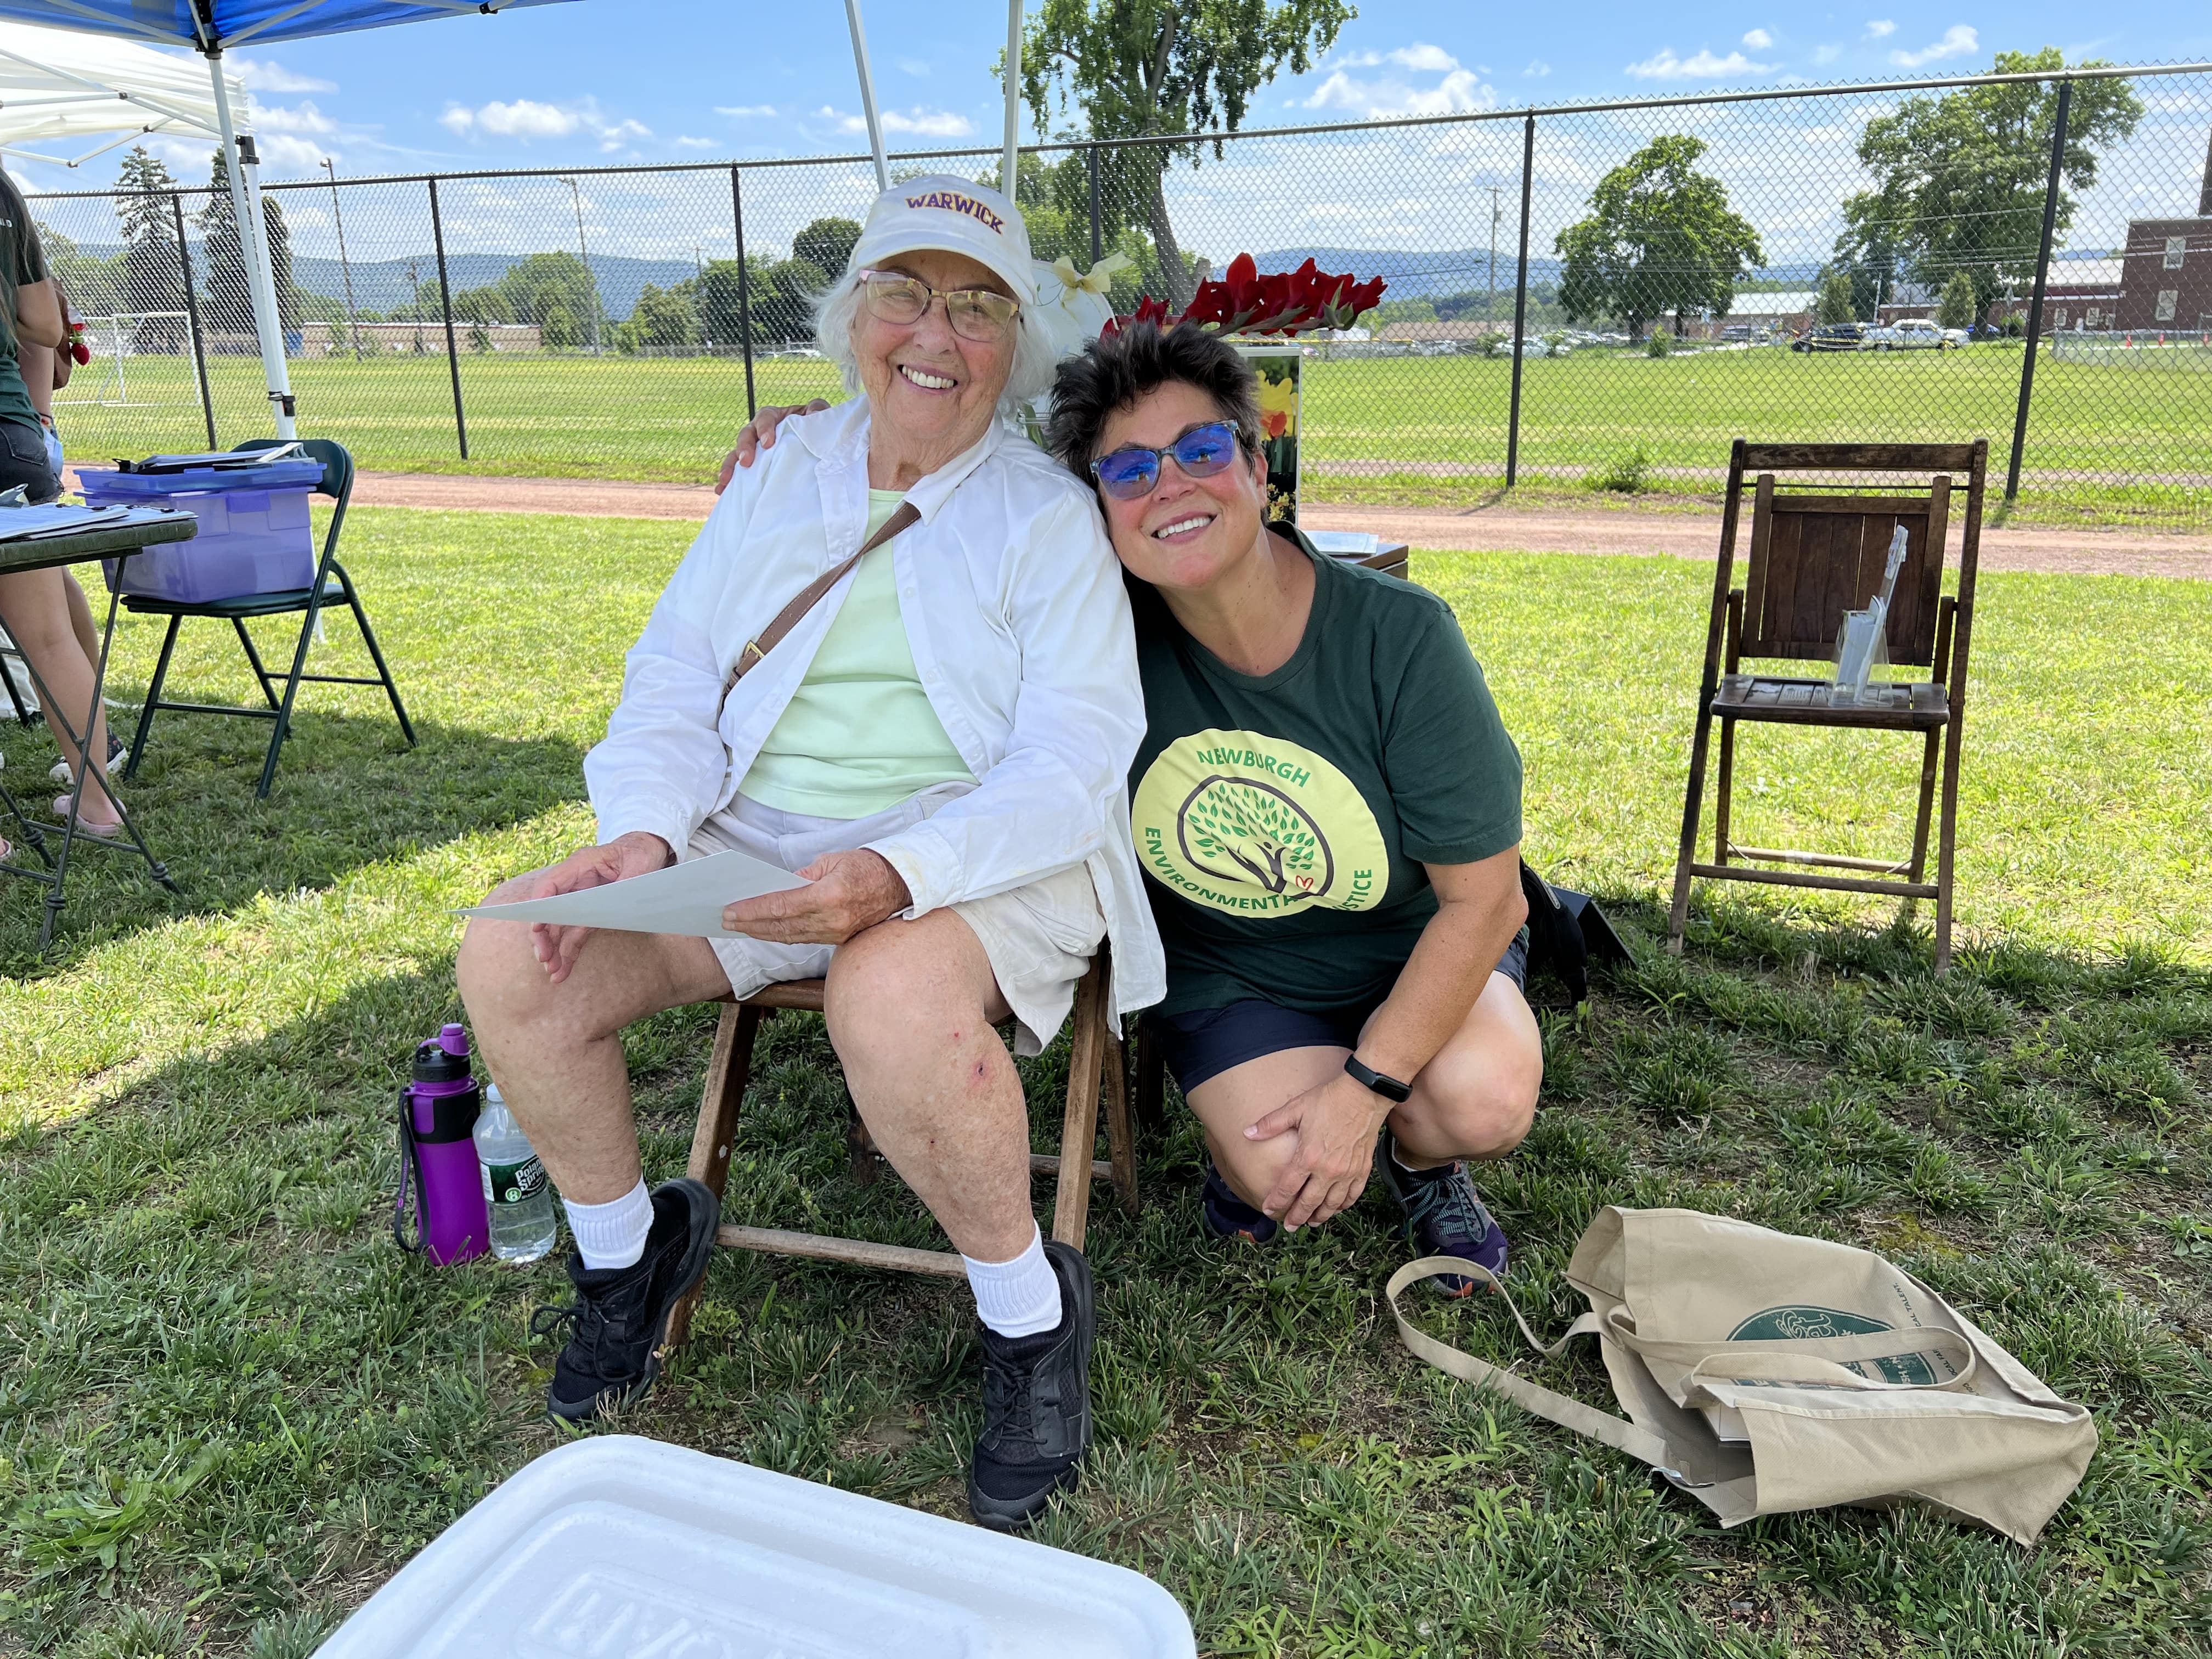 Carol Lawrence and Kathy Lawrence from the Greater Newburgh Parks Conservancy sitting next to eachother